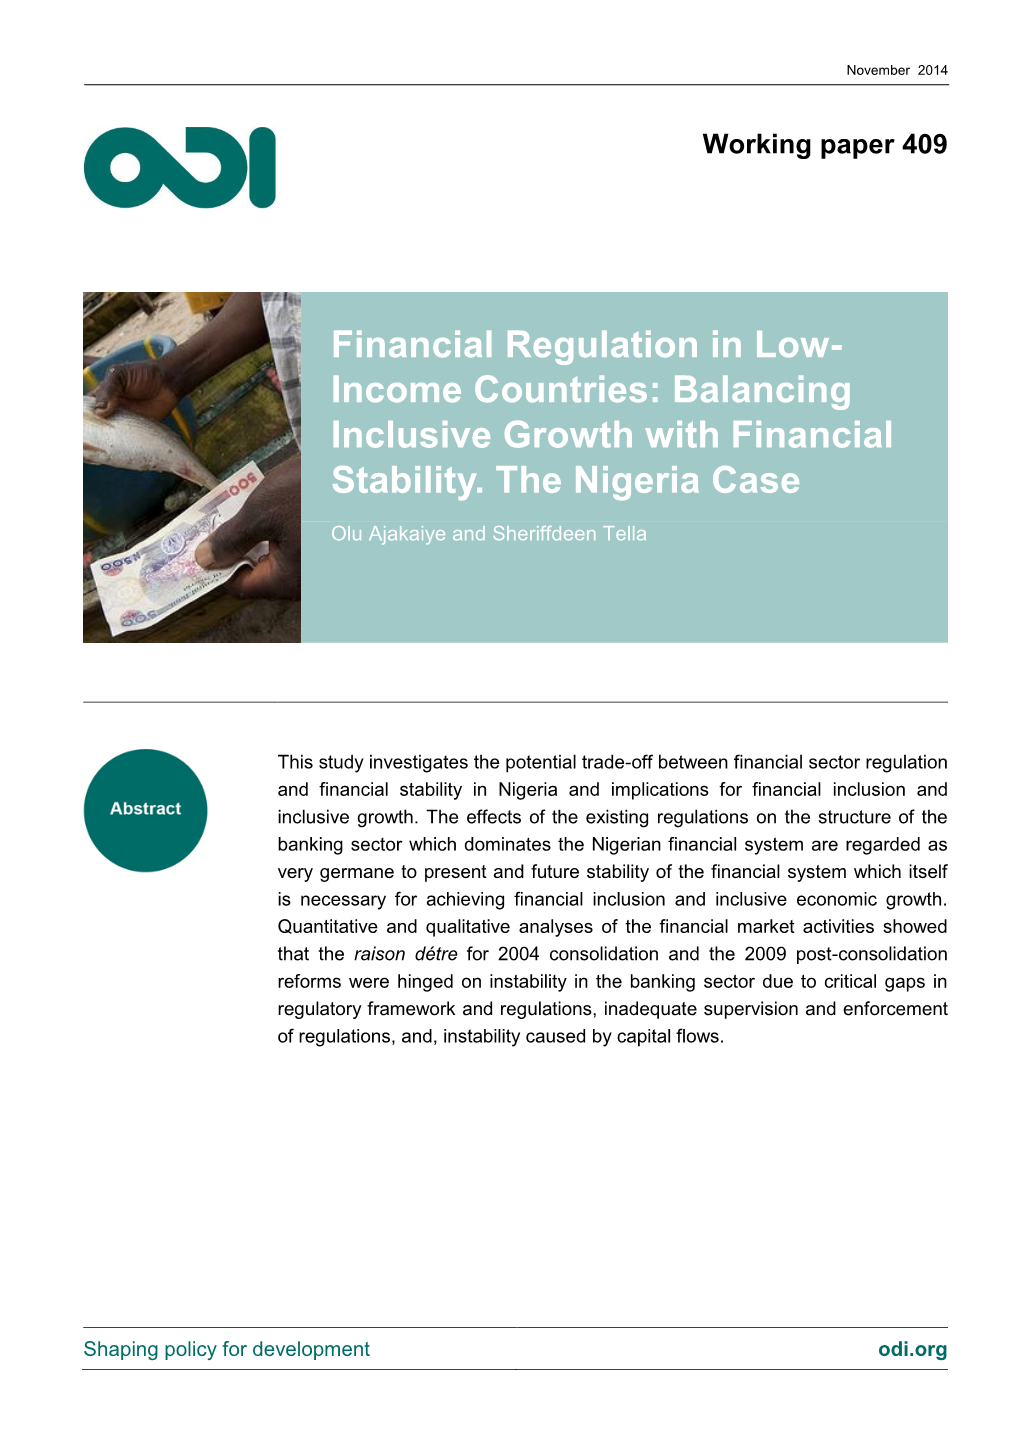 Financial Regulation in Low- Income Countries: Balancing Inclusive Growth with Financial Stability